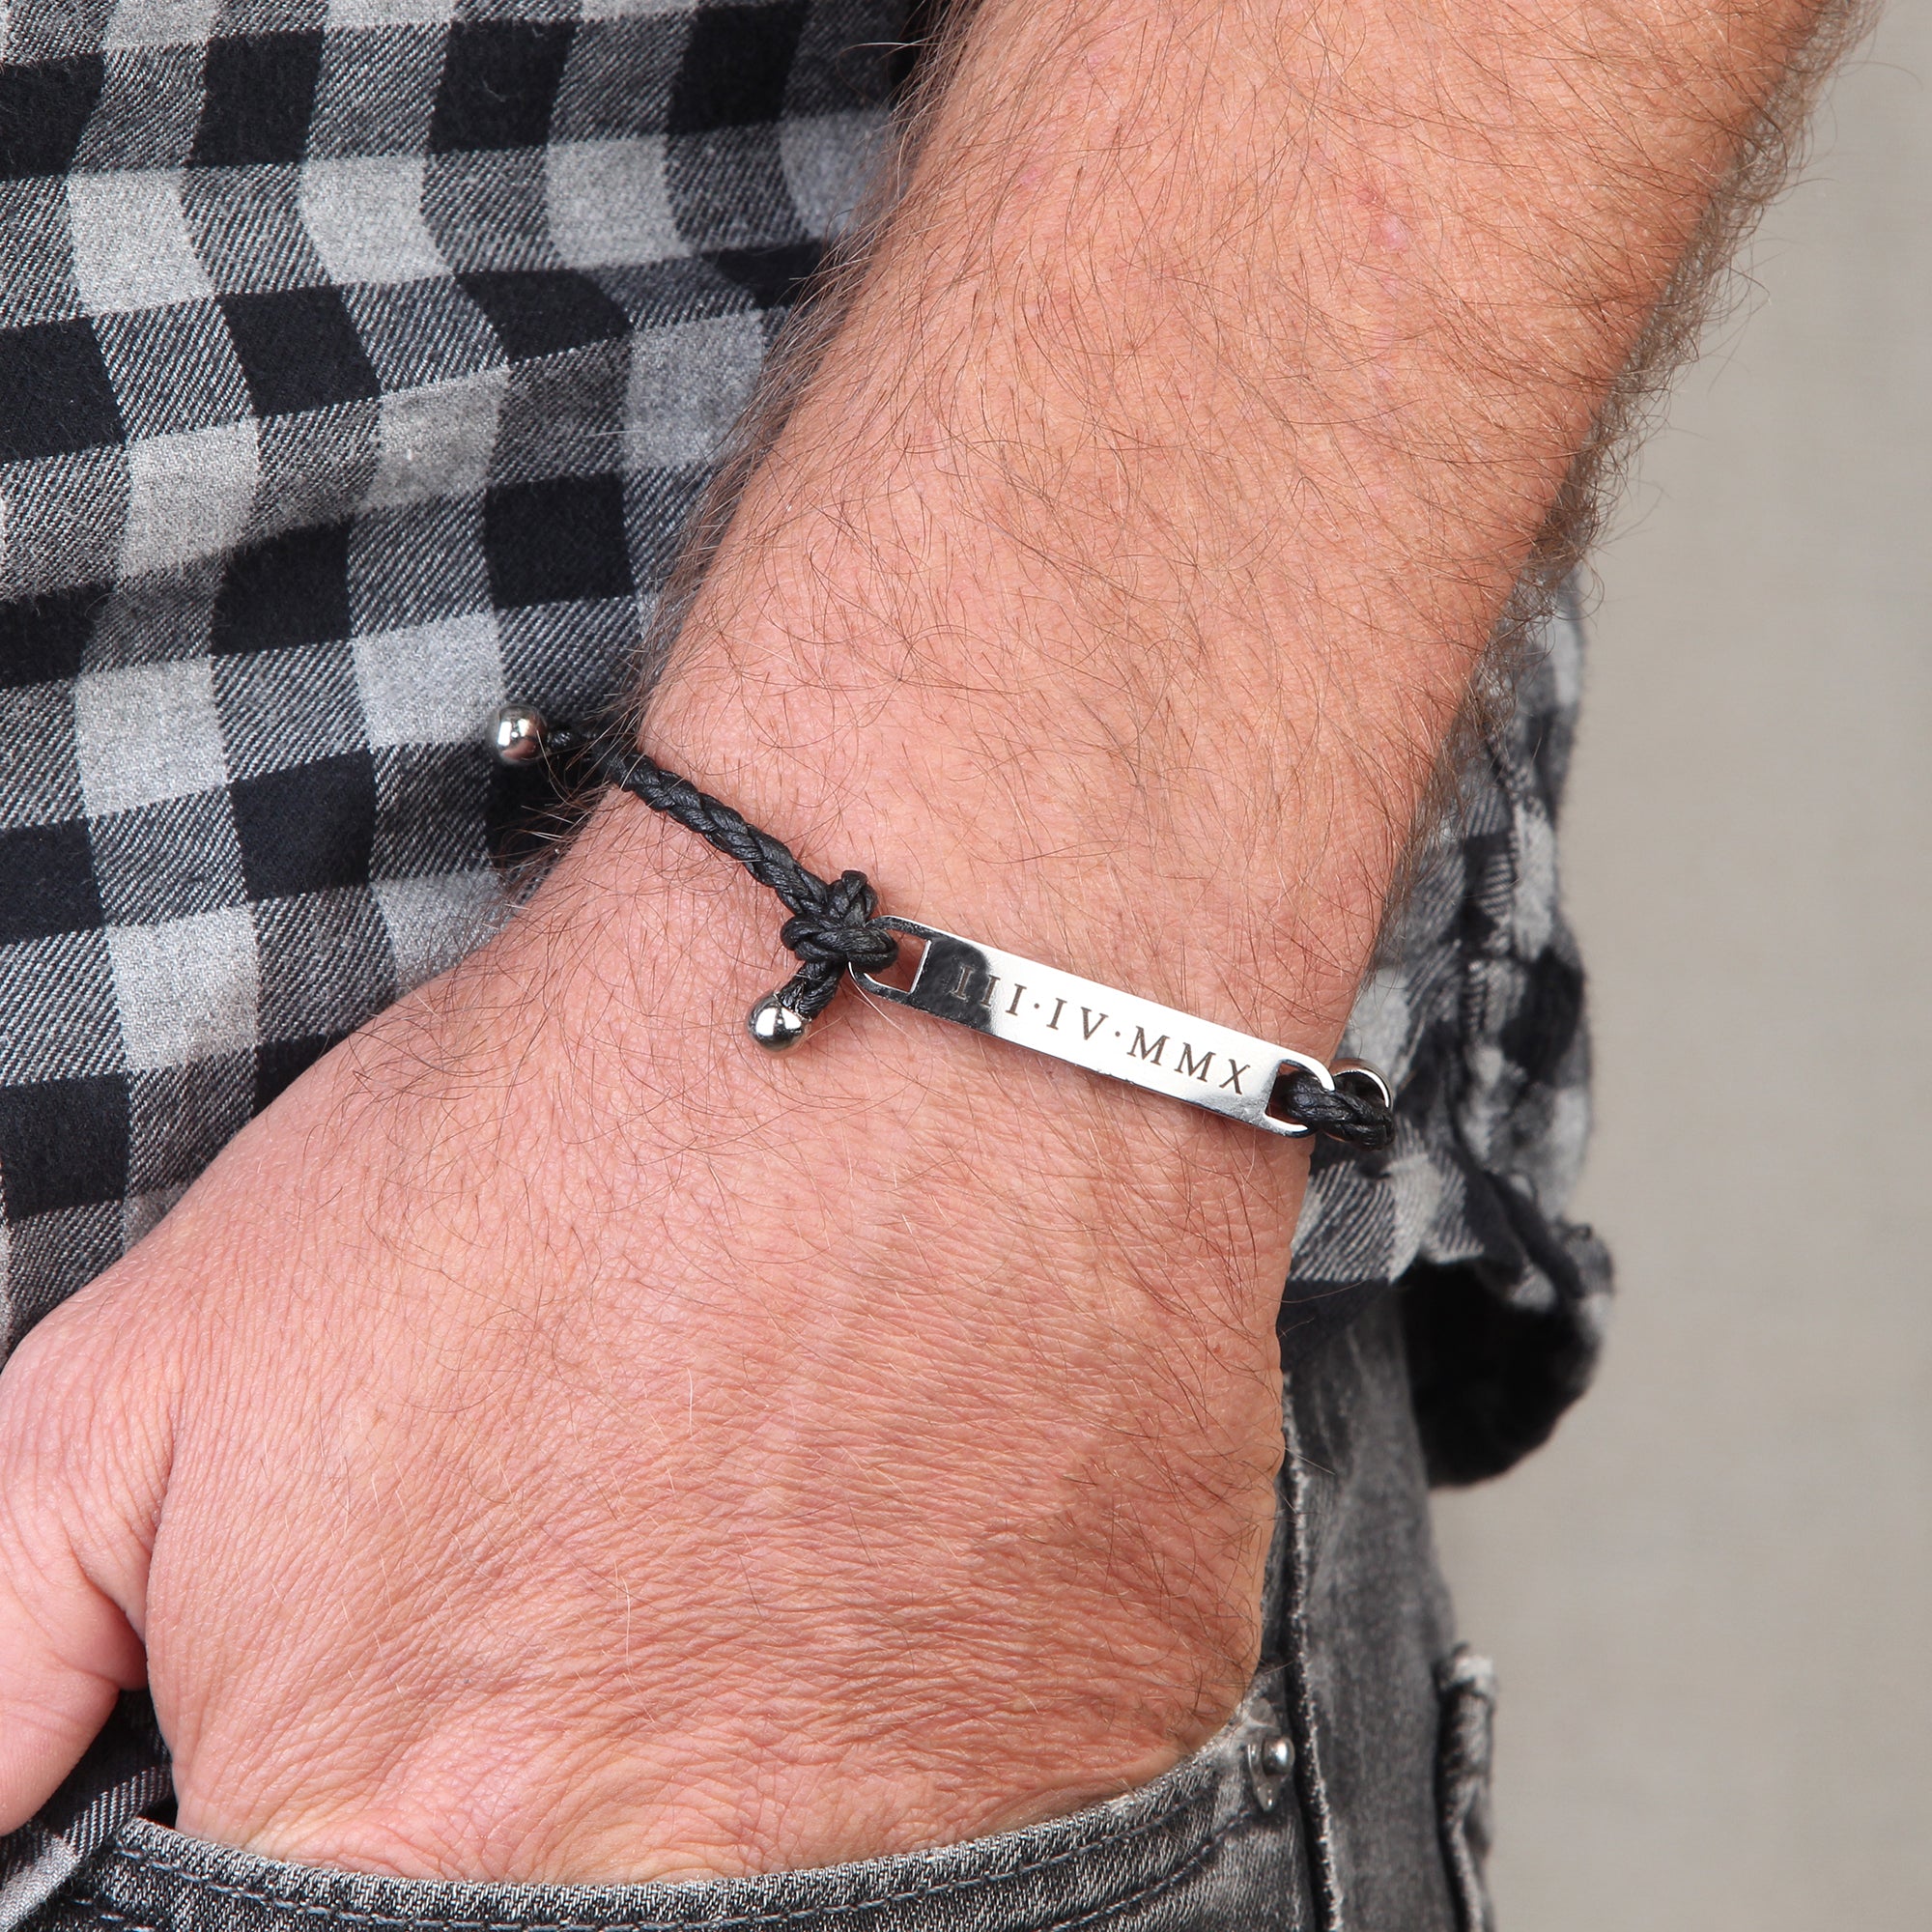 Personalized Stainless Steel Wide Wristband Chain Male Bracelets With  Engraved Name ID For Men Unique Punk Fashion Bangle From Harden_vol2, $13.3  | DHgate.Com